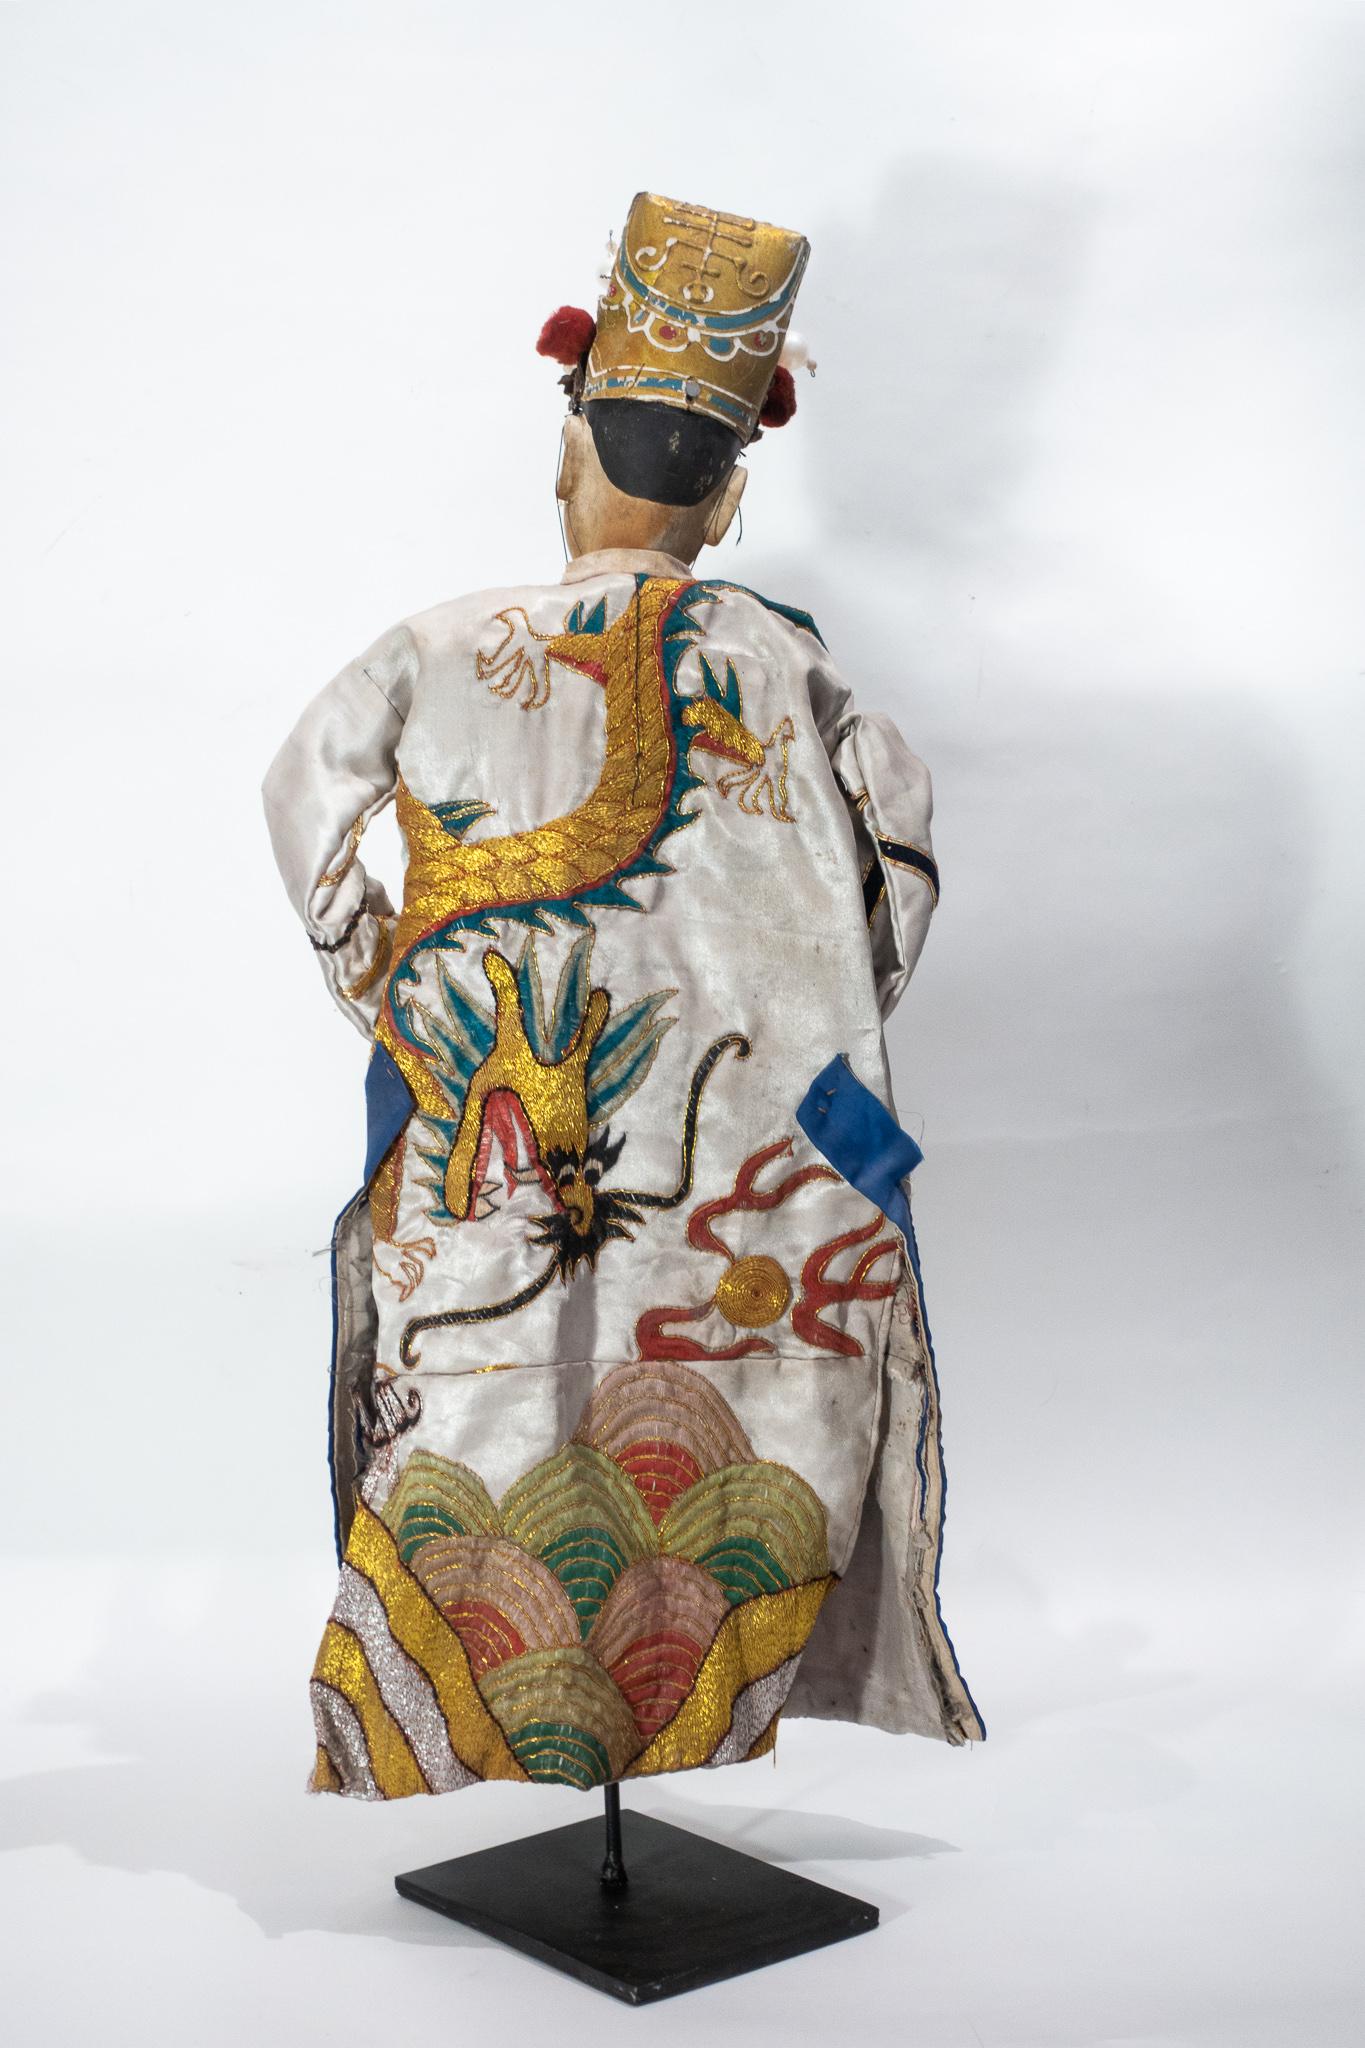 Chinese opera marionette male doll, circa 1920s. The head of this puppet is carved in a soft wood; the feet and hands are also made of wood. The hands can form a closed fist or an open palm by the joint at the level of the fingers. The headdress of